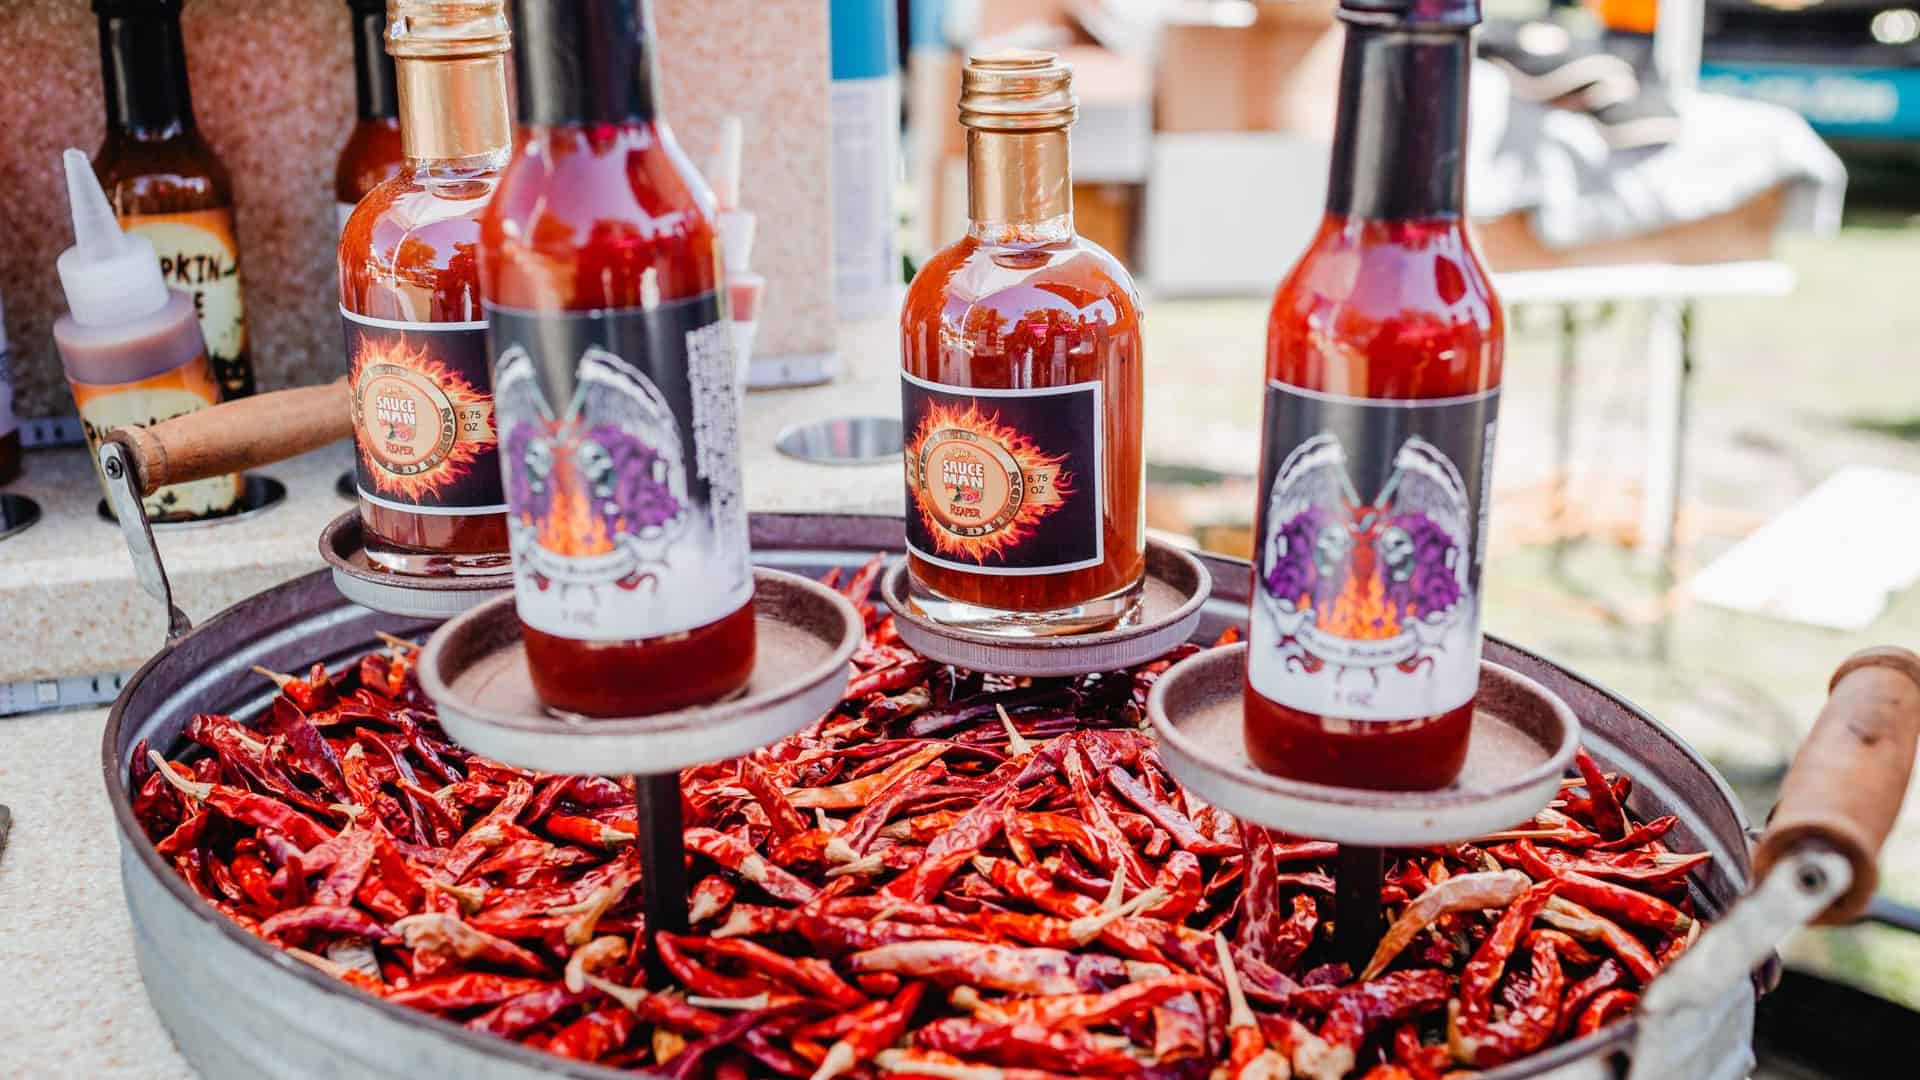 Pinellas Pepper Fest brings hot and spicy food show to St. Pete this